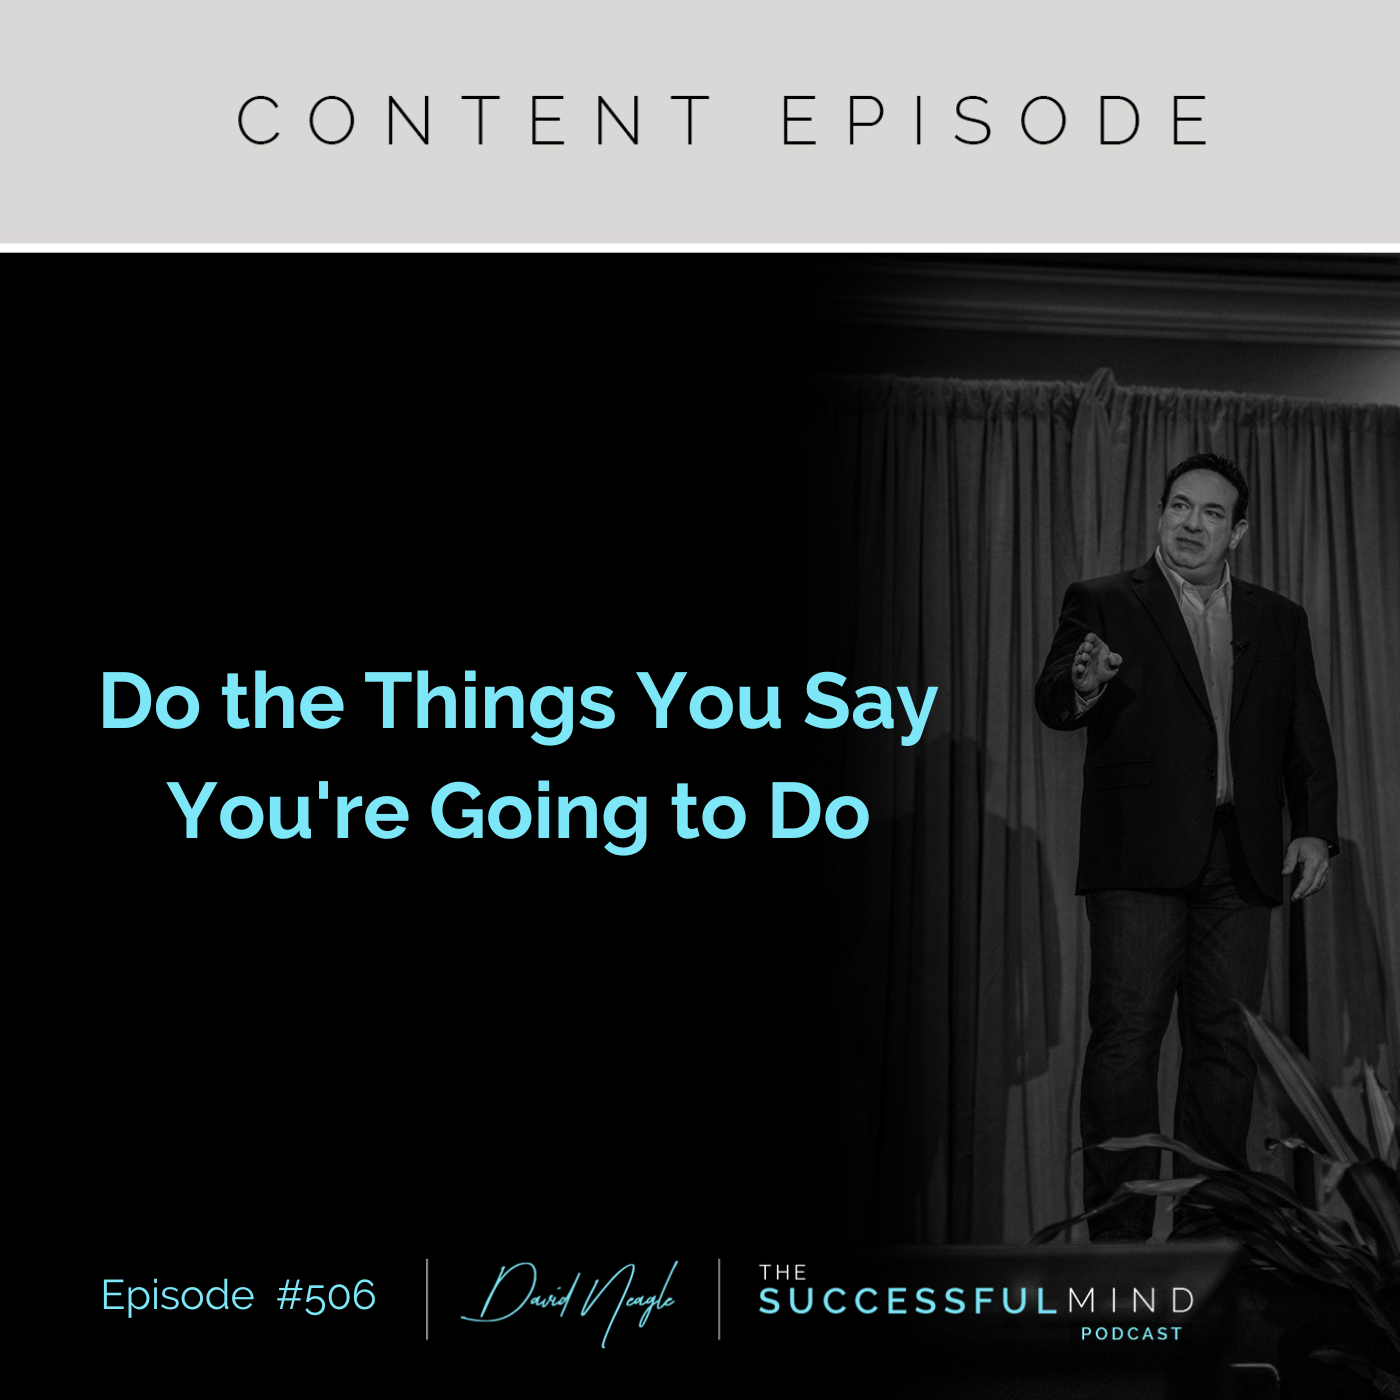 The Successful Mind Podcast - Episode 506 - Do the Things You Say You're Going to Do